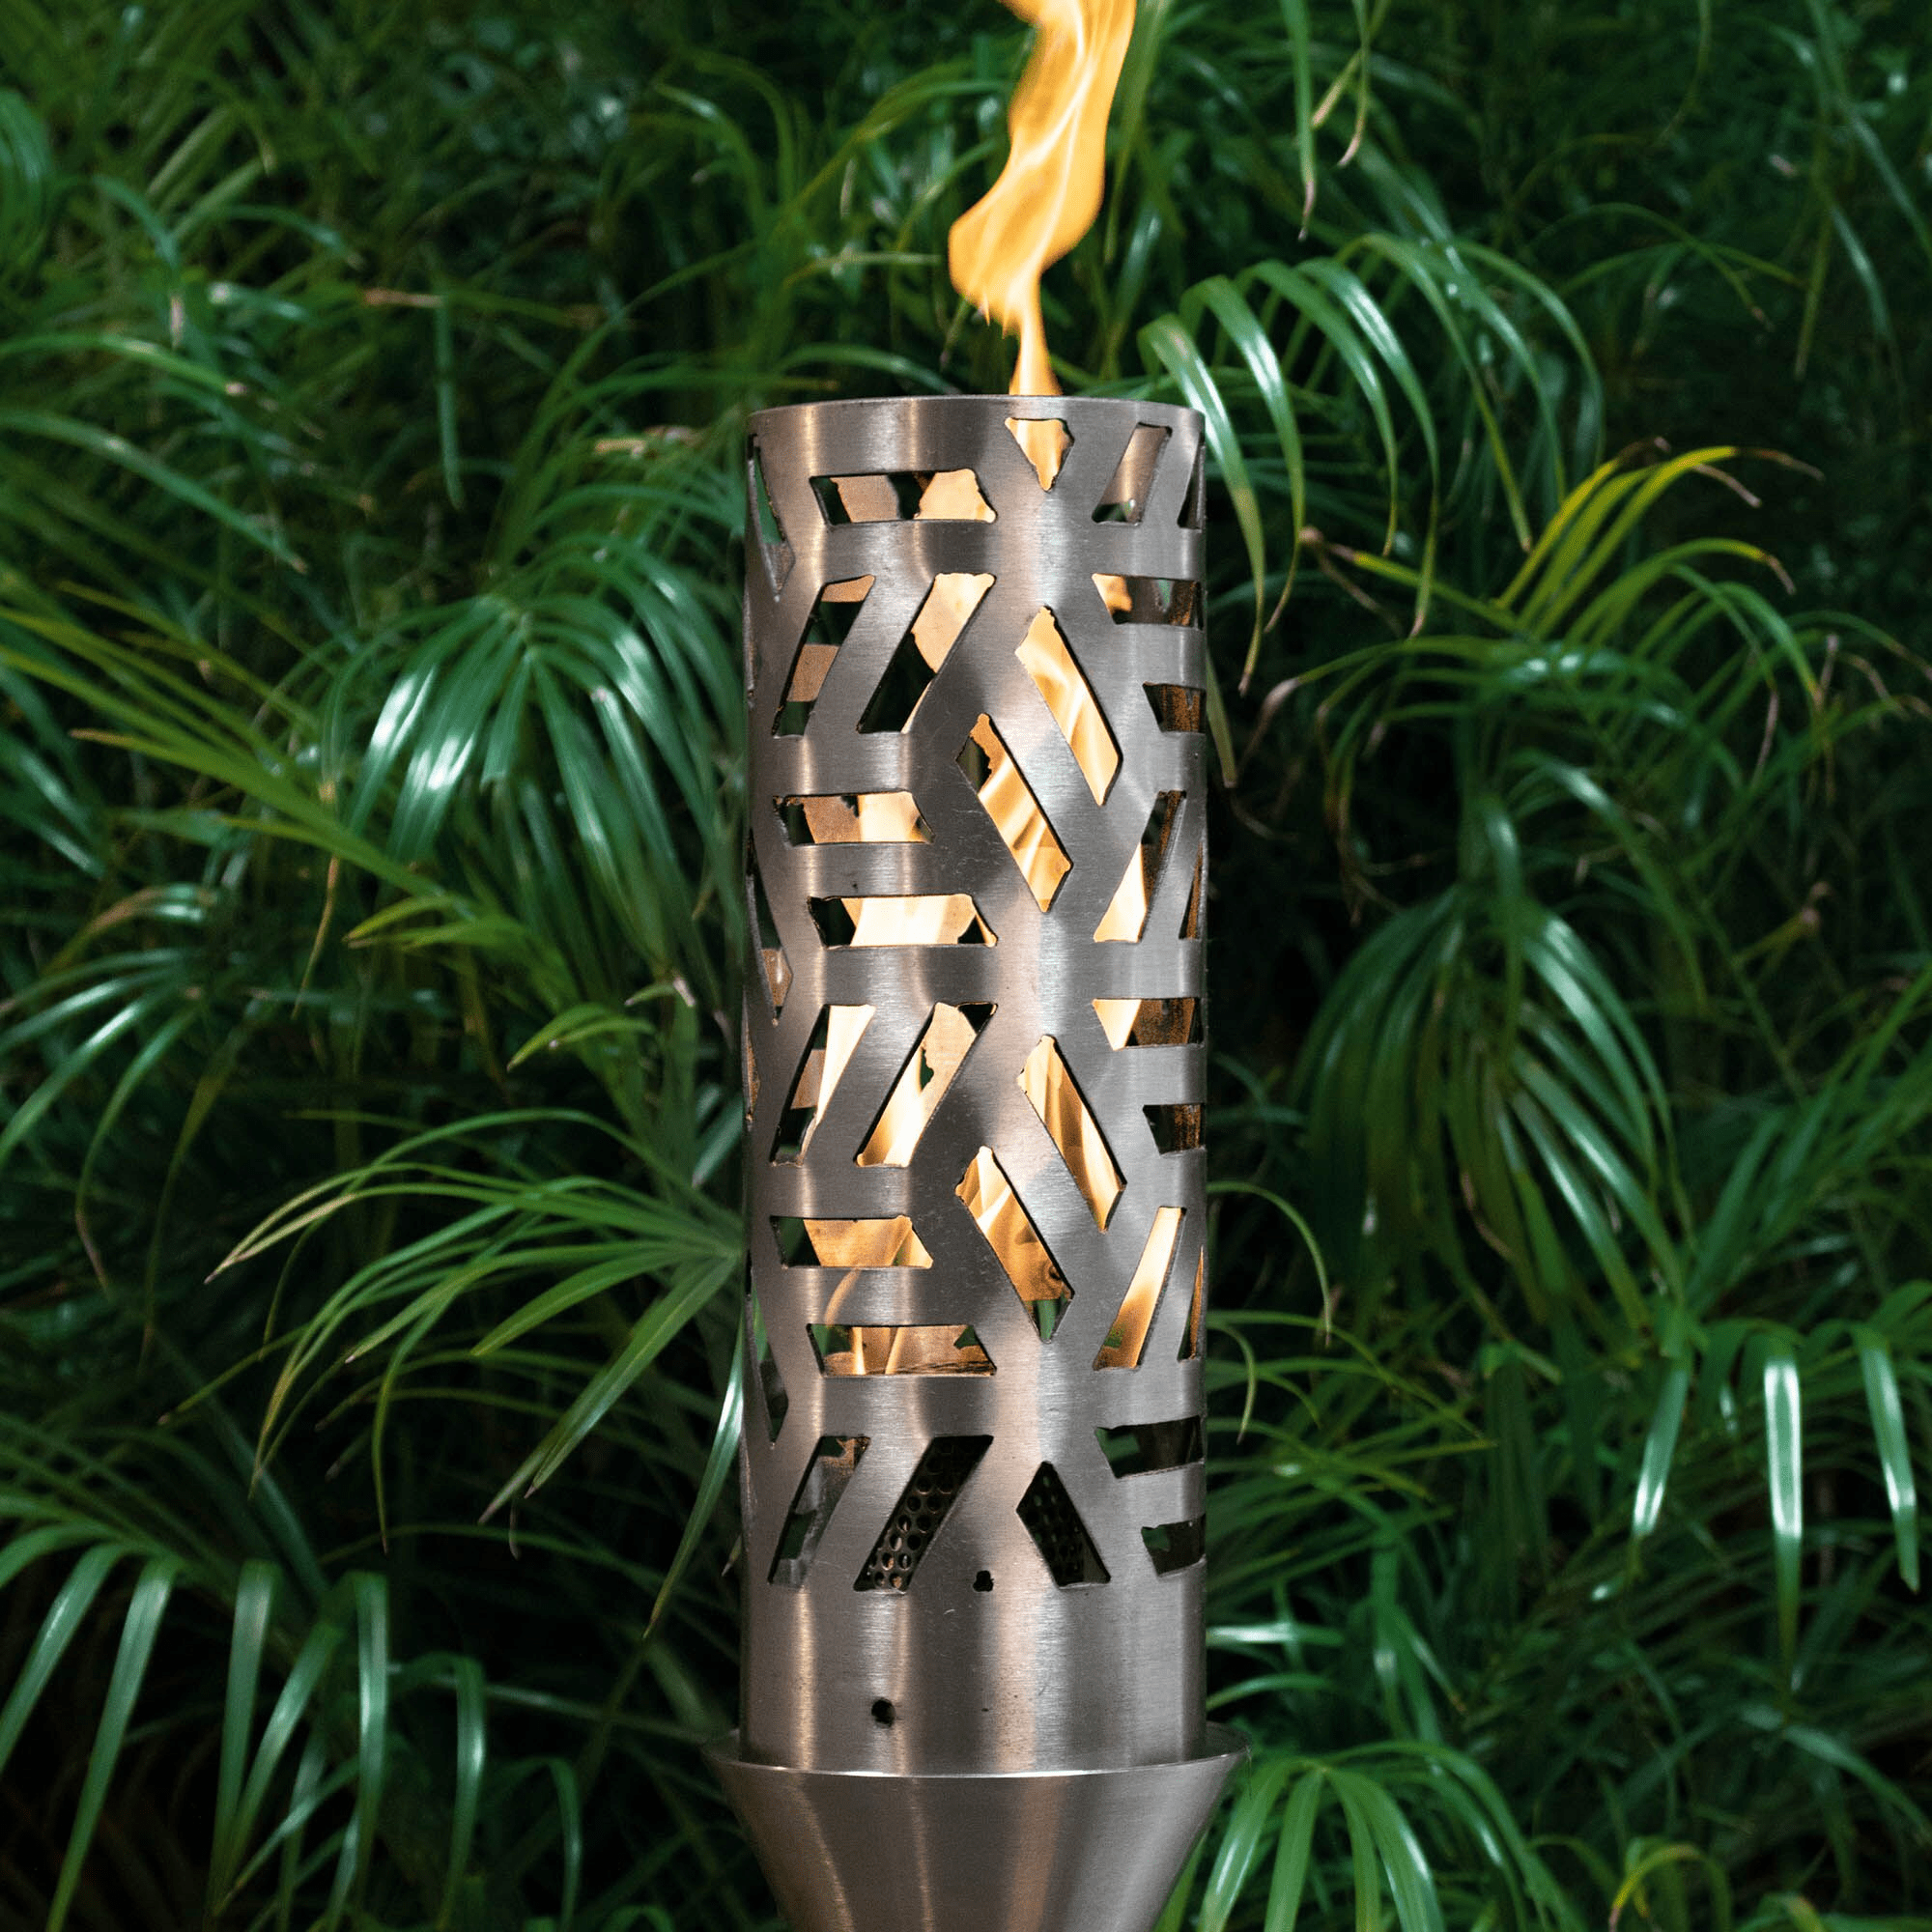 The Outdoor Plus Torch The Outdoor Plus Cubist Fire Torch - Stainless Steel OPT-TT19M